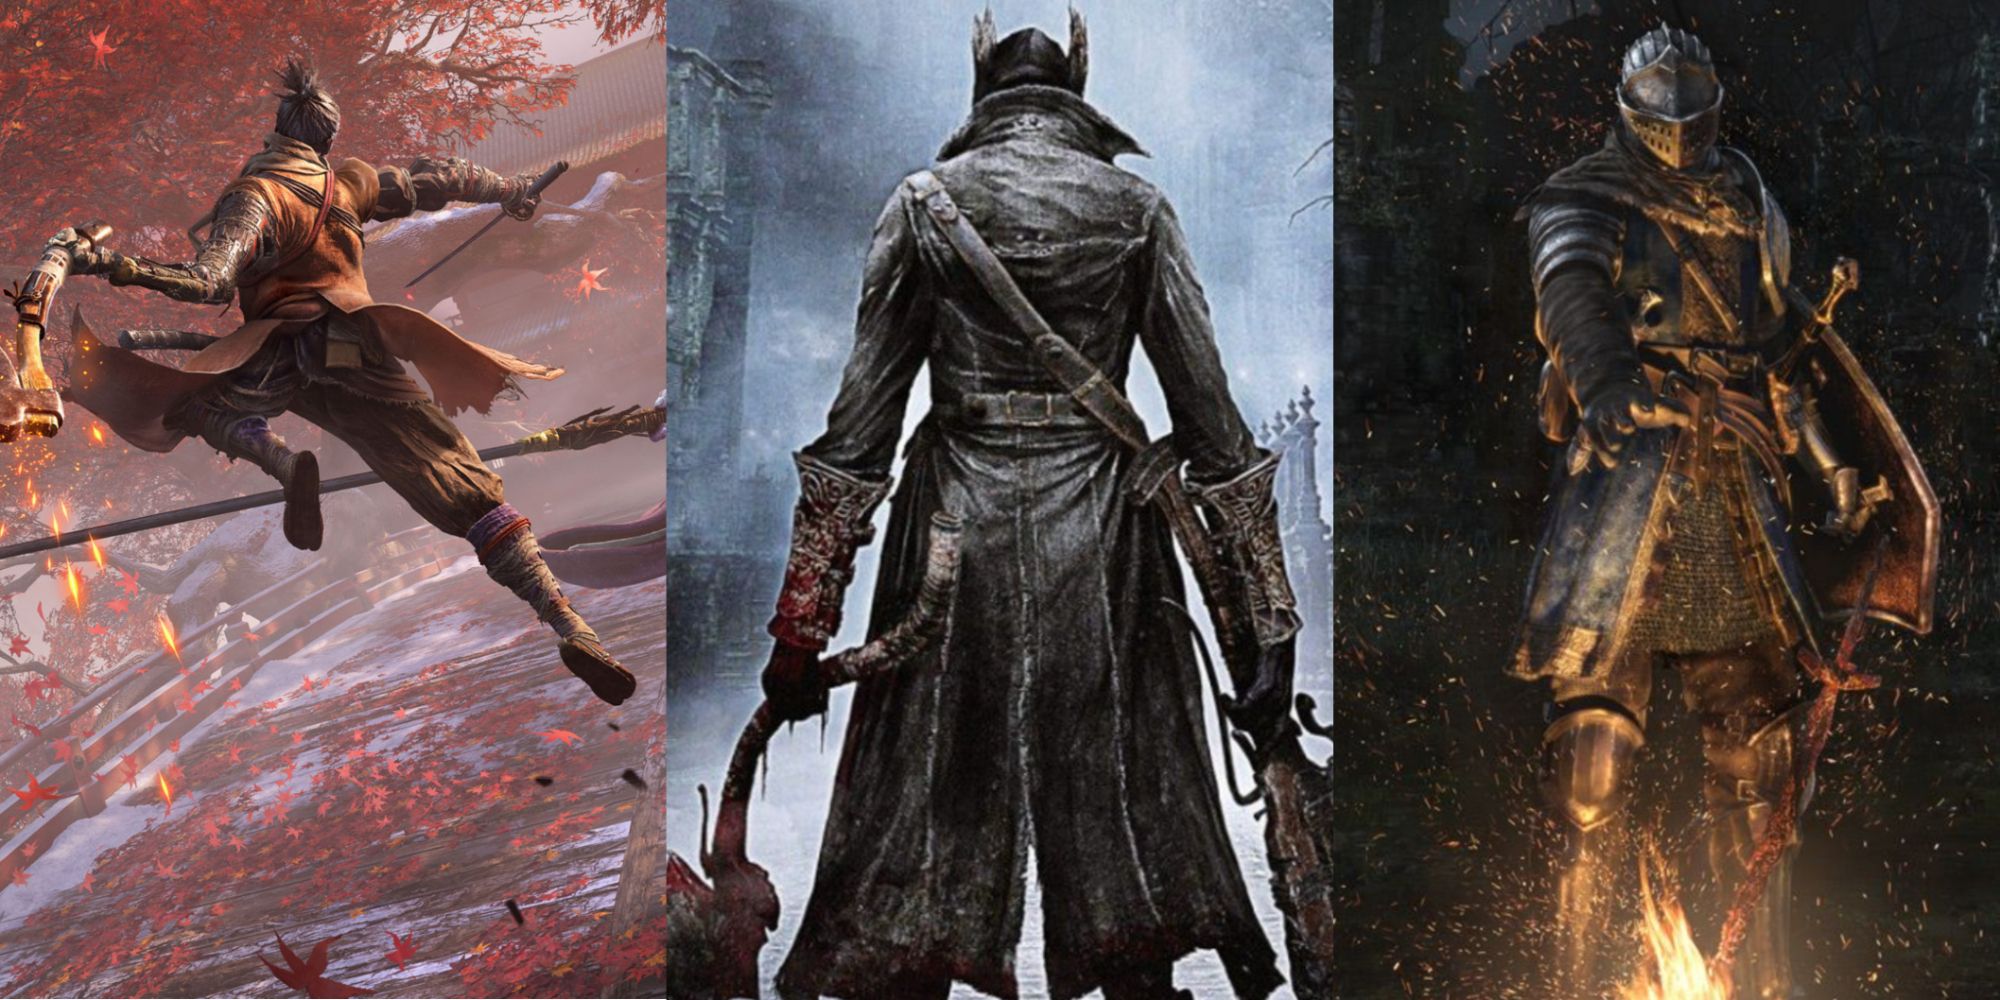 official image from sekiro, bloodborne and dark souls